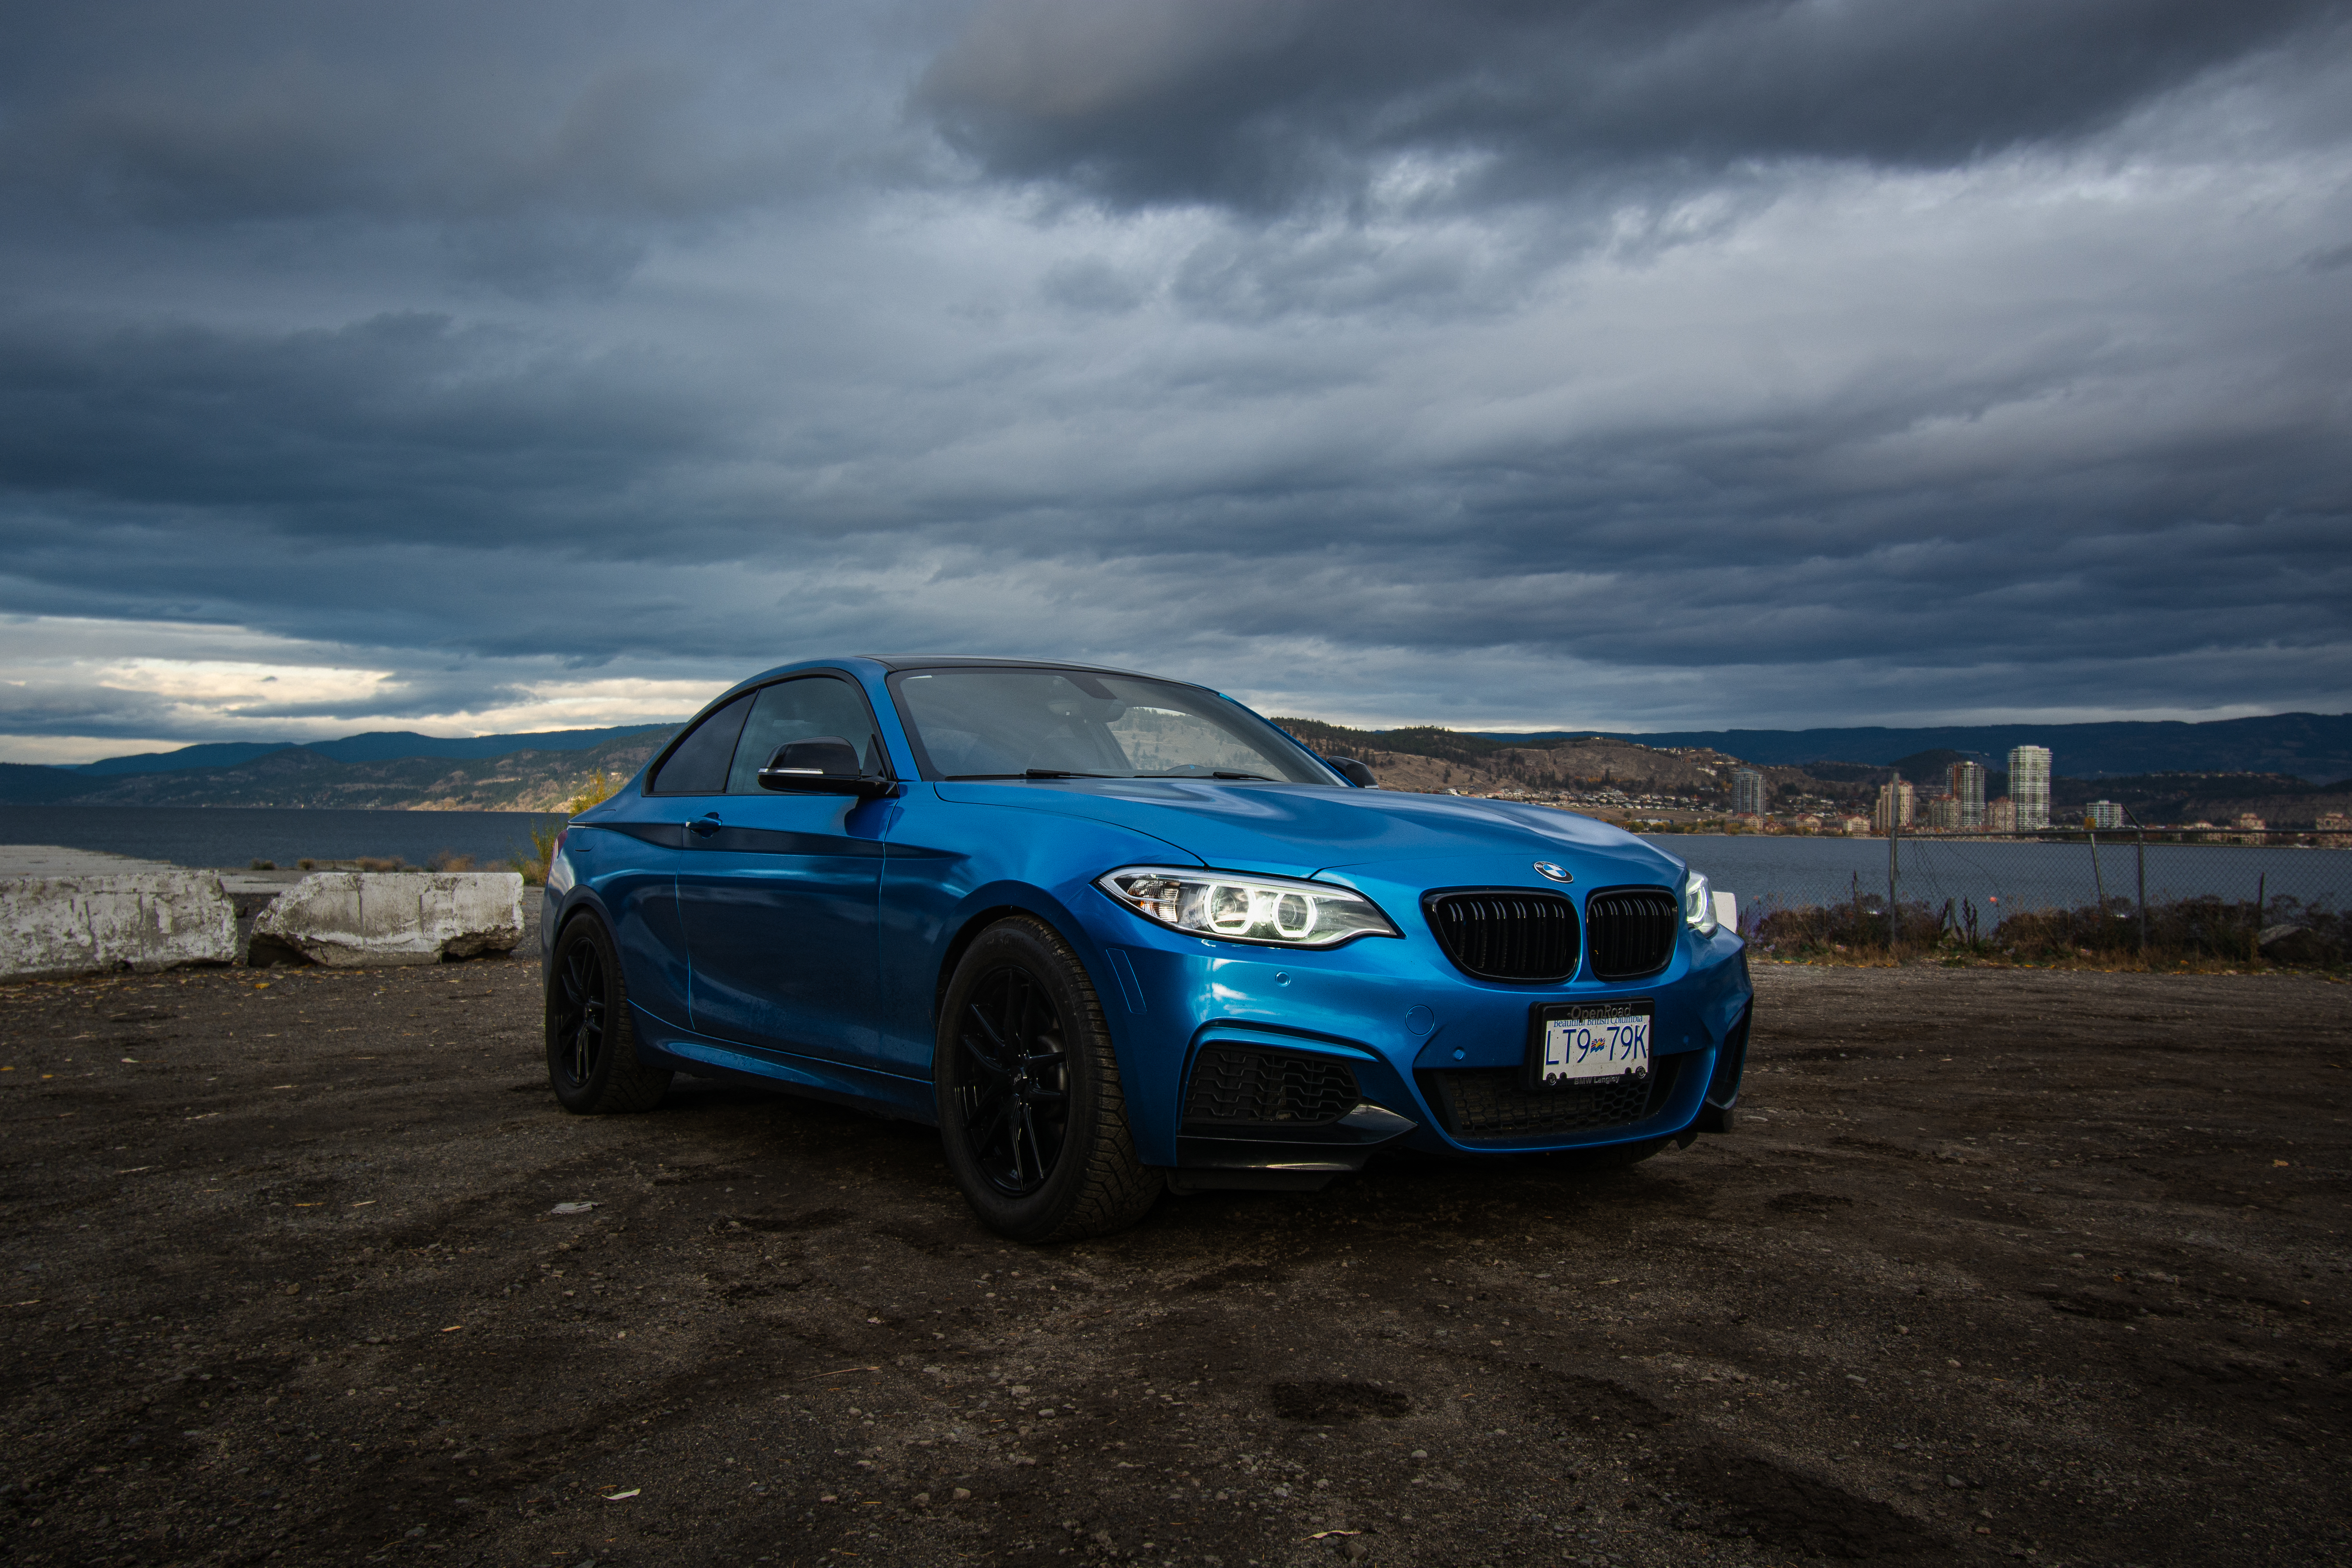 2016 Blue BMW 2 series front quarter side view with the backdrop of the lake